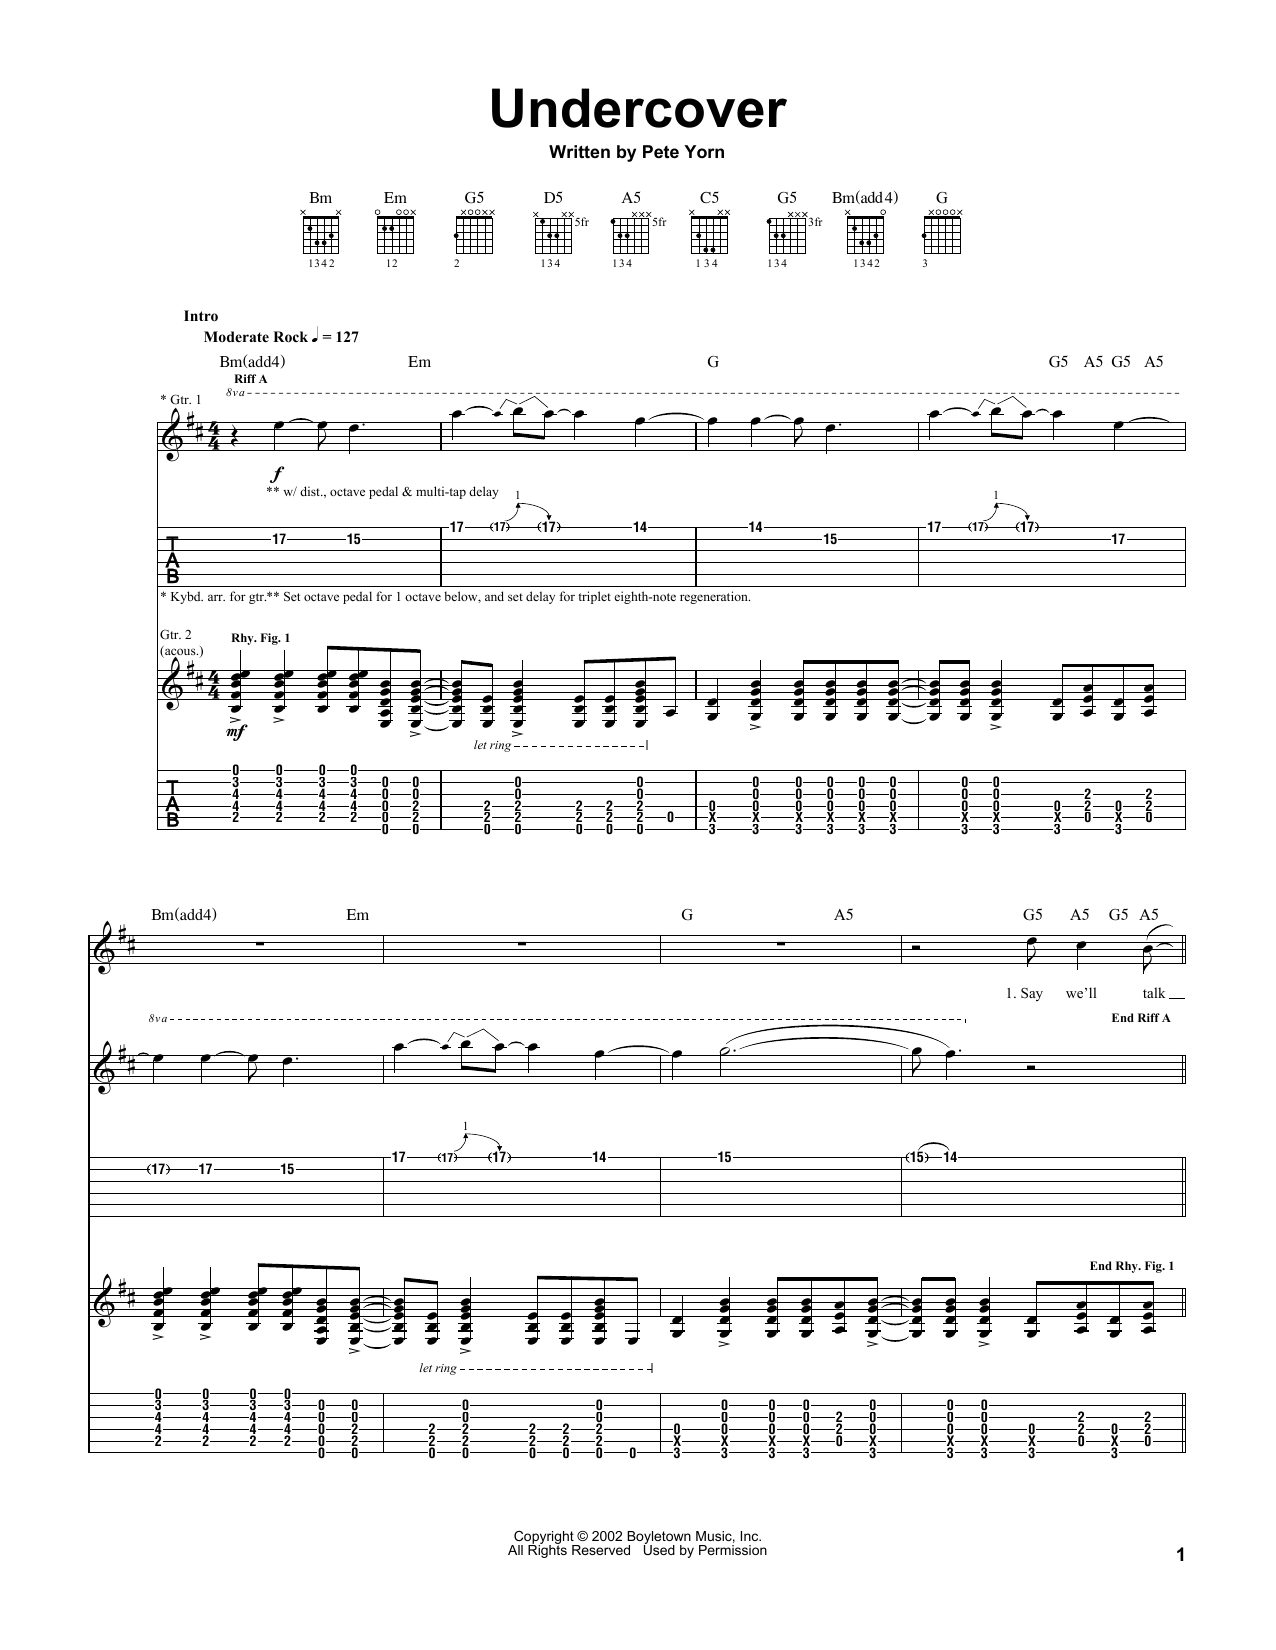 Download Pete Yorn Undercover Sheet Music